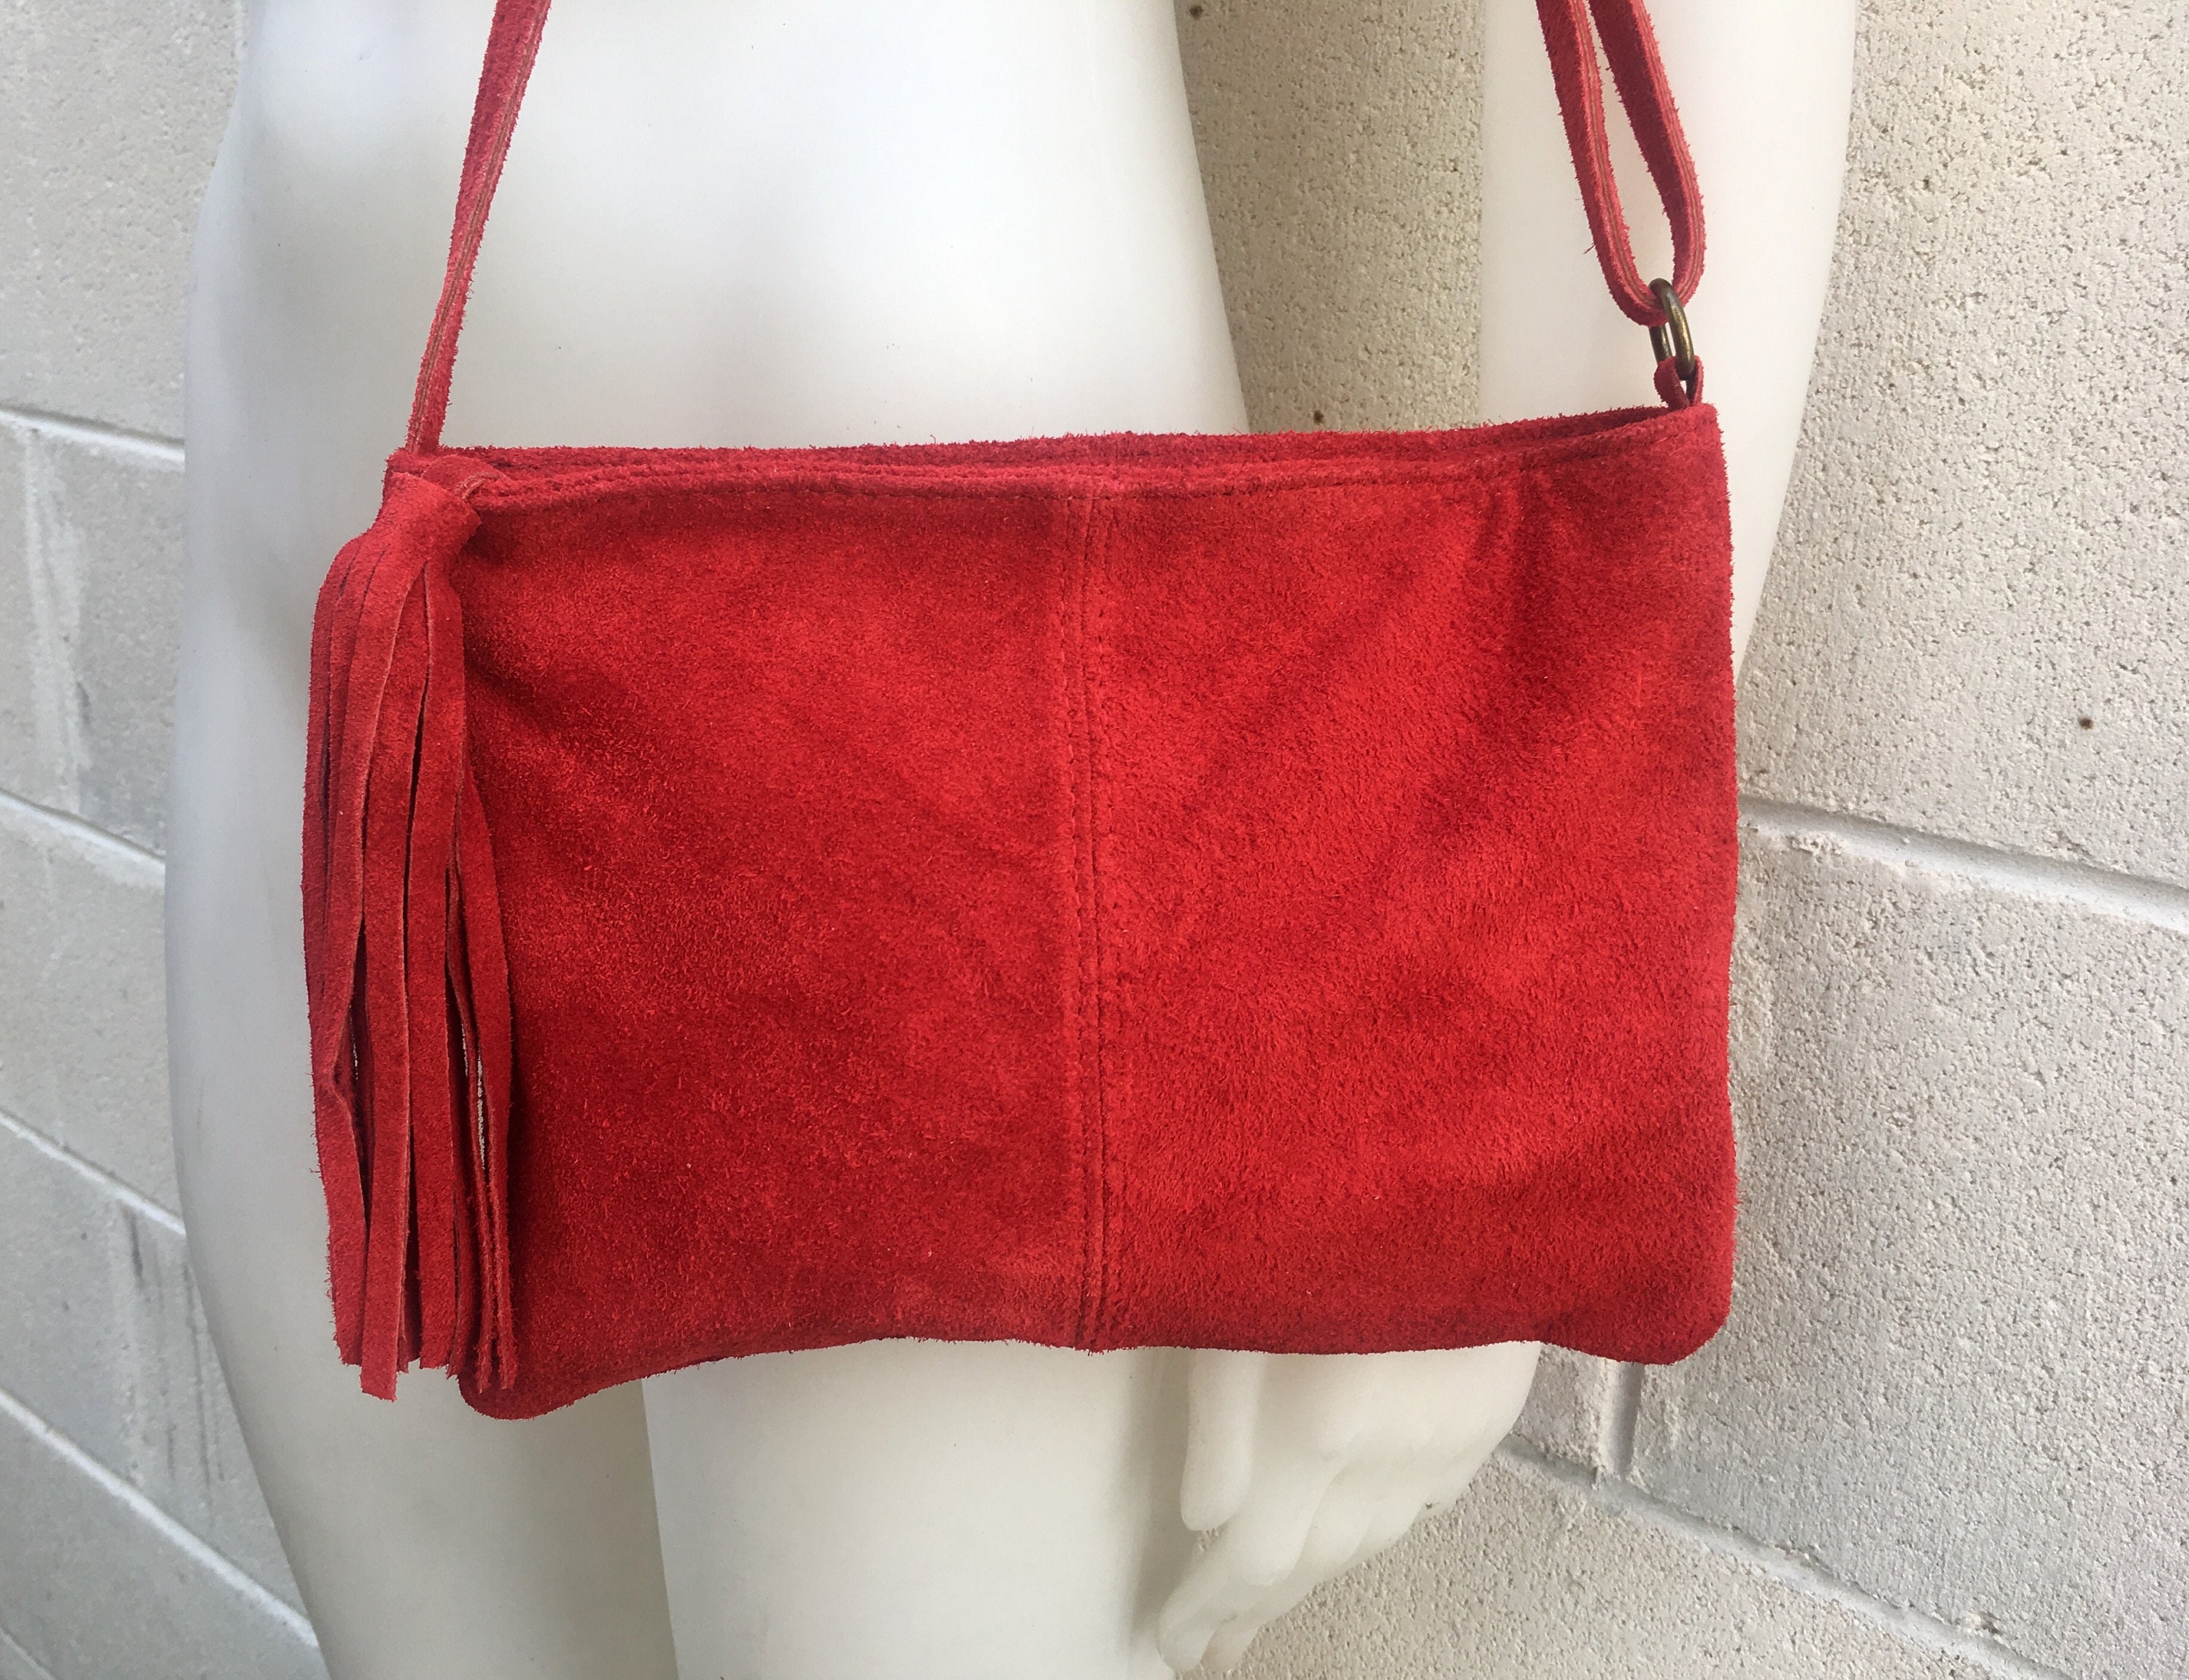 Suede leather bag in RED . Cross body bag, shoulder bag in GENUINE leather.  Small leather bags, bike bags,adjustable strap and zipper.